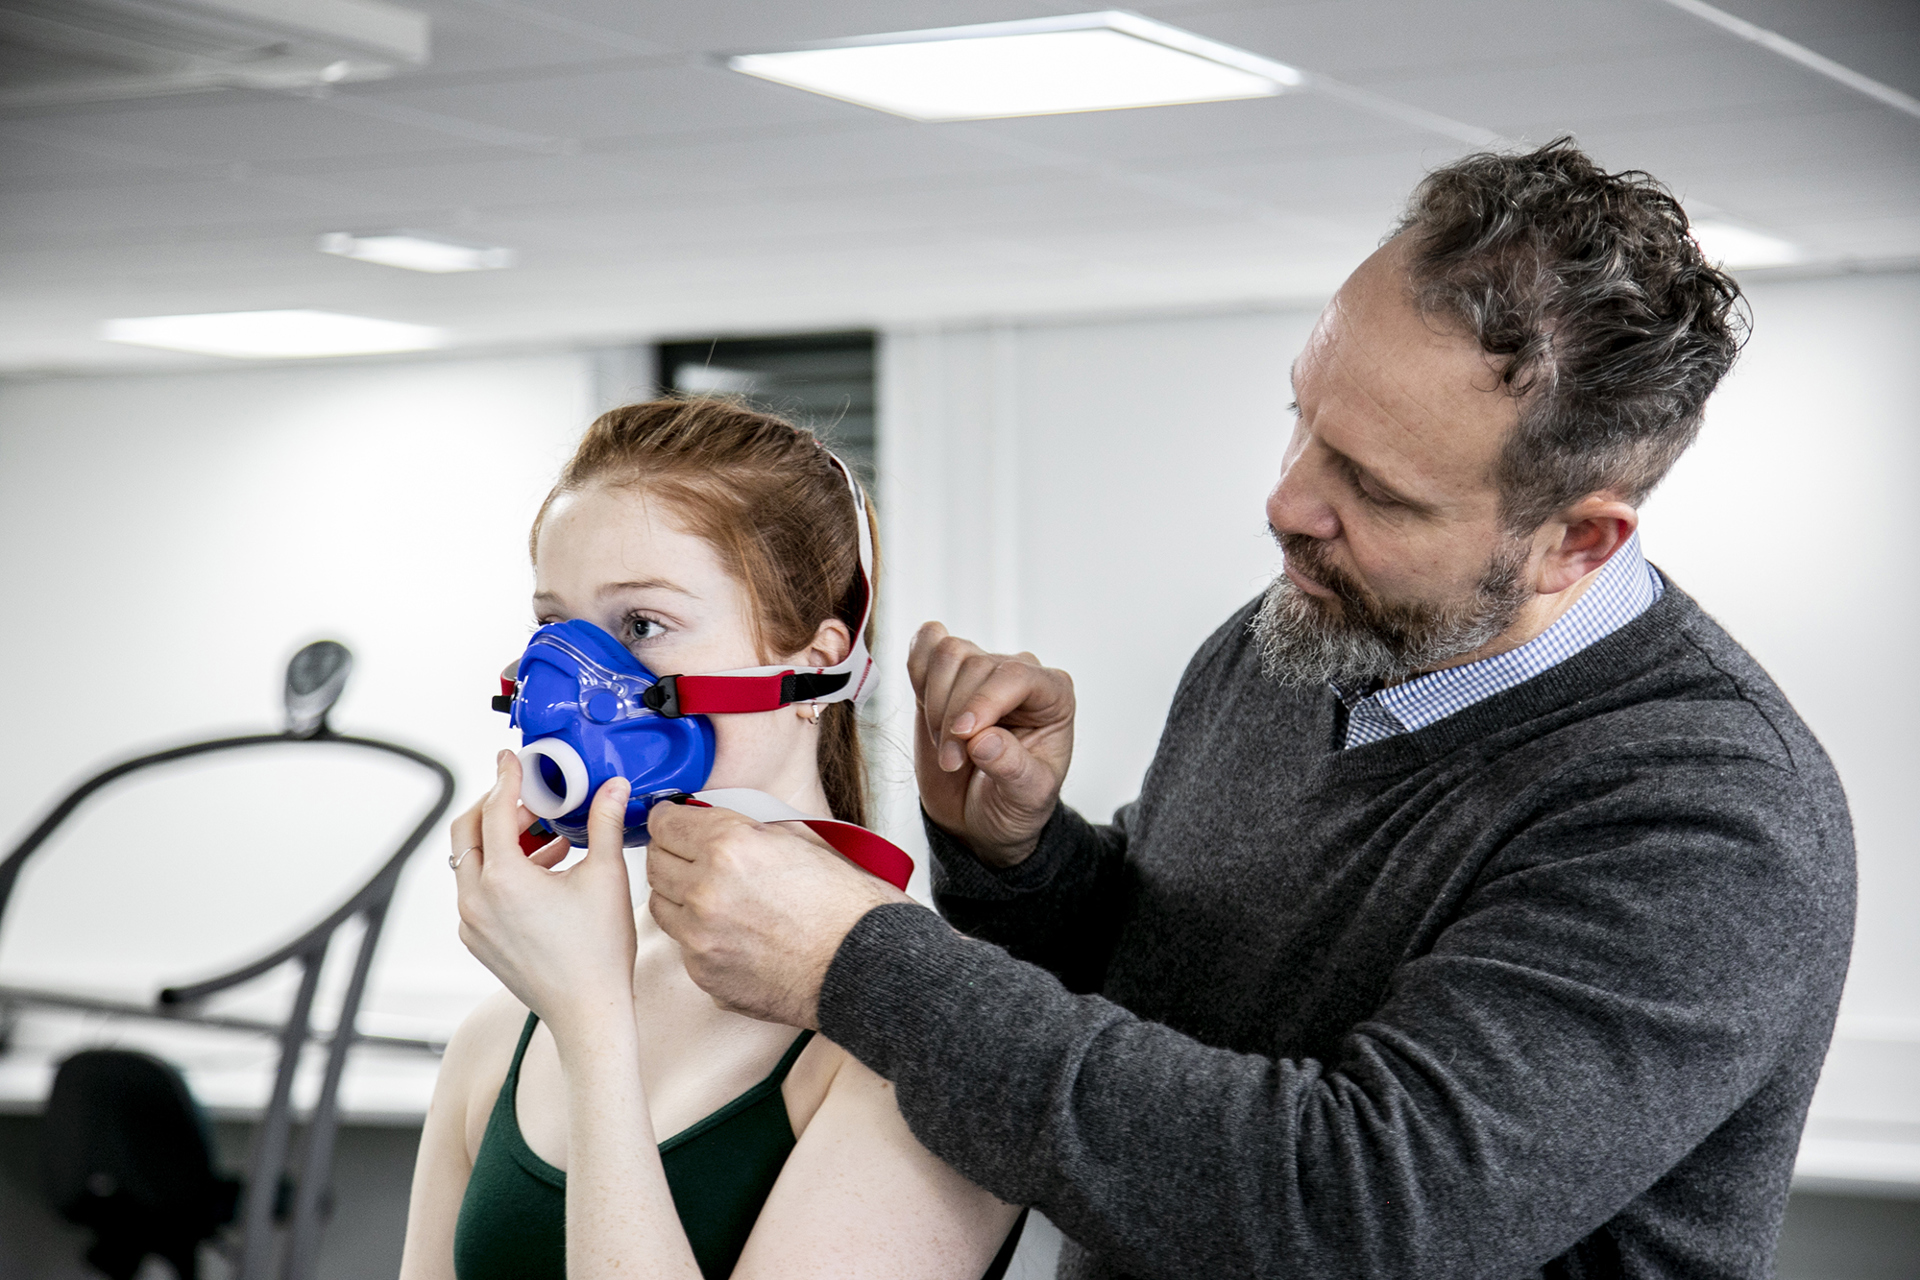 White female dancer with long red hair with white male physiologisttightening face-mask to the dancer to measure cardiovascular fitness. In a white laboratory setting.